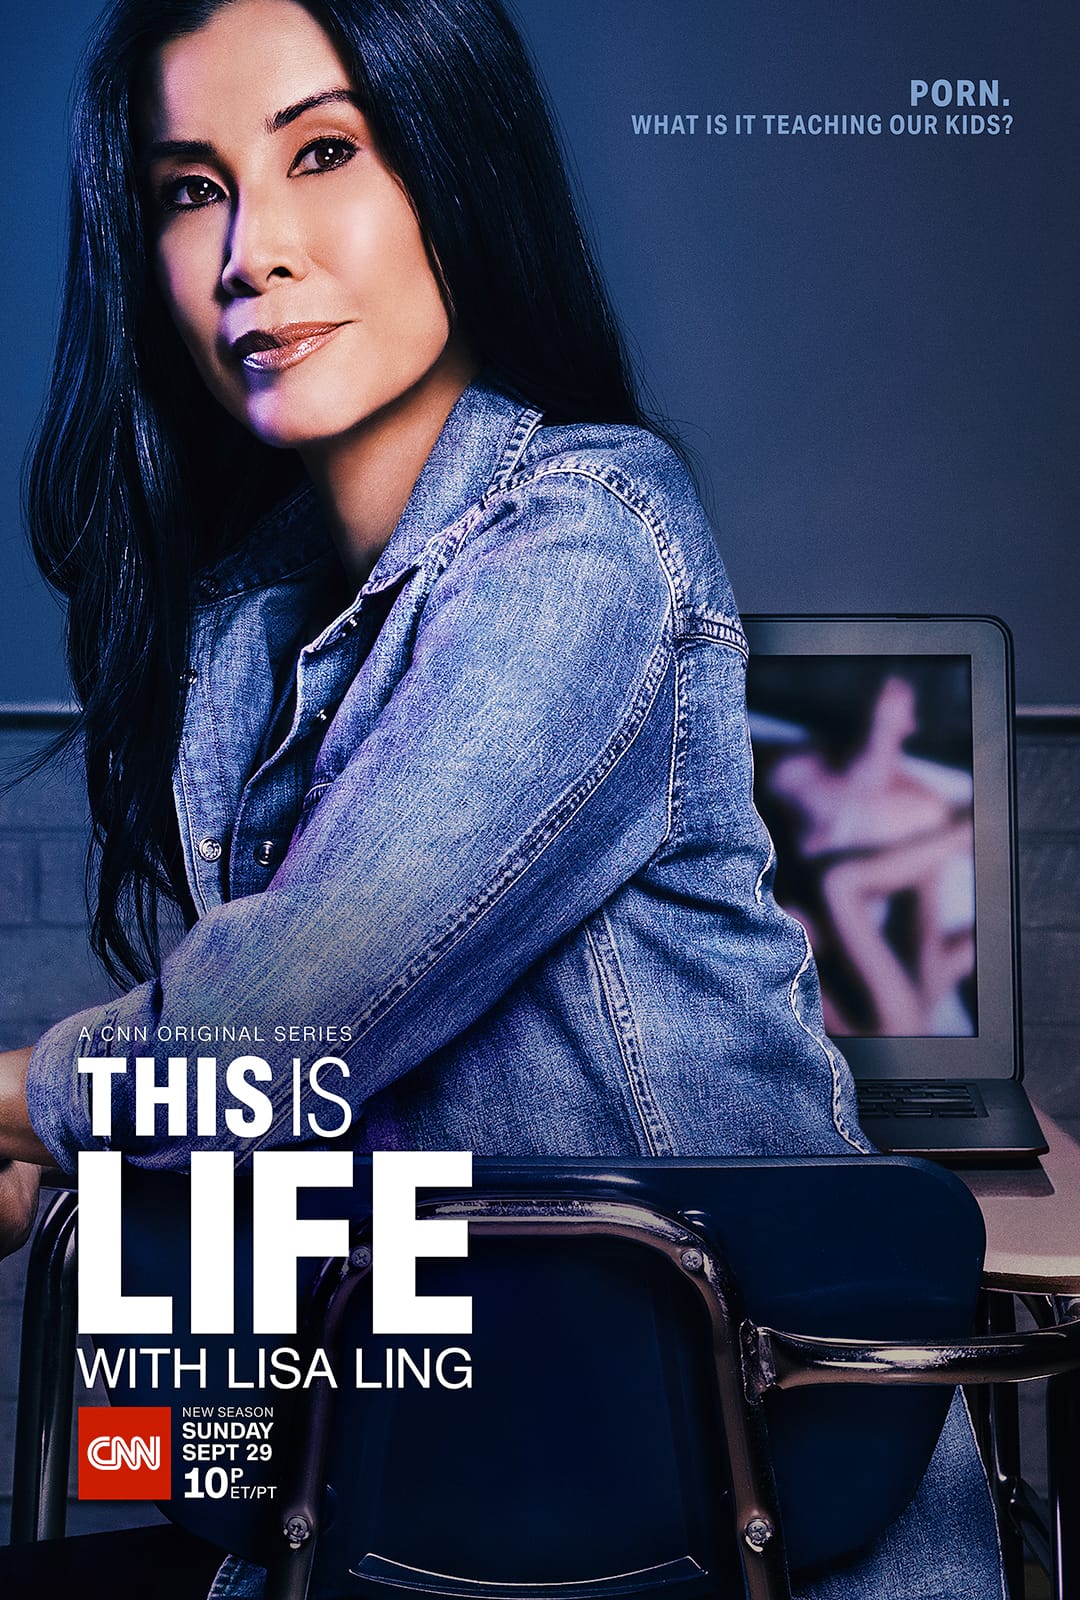 1080px x 1600px - This is Life with Lisa Ling - CNN Creative Marketing